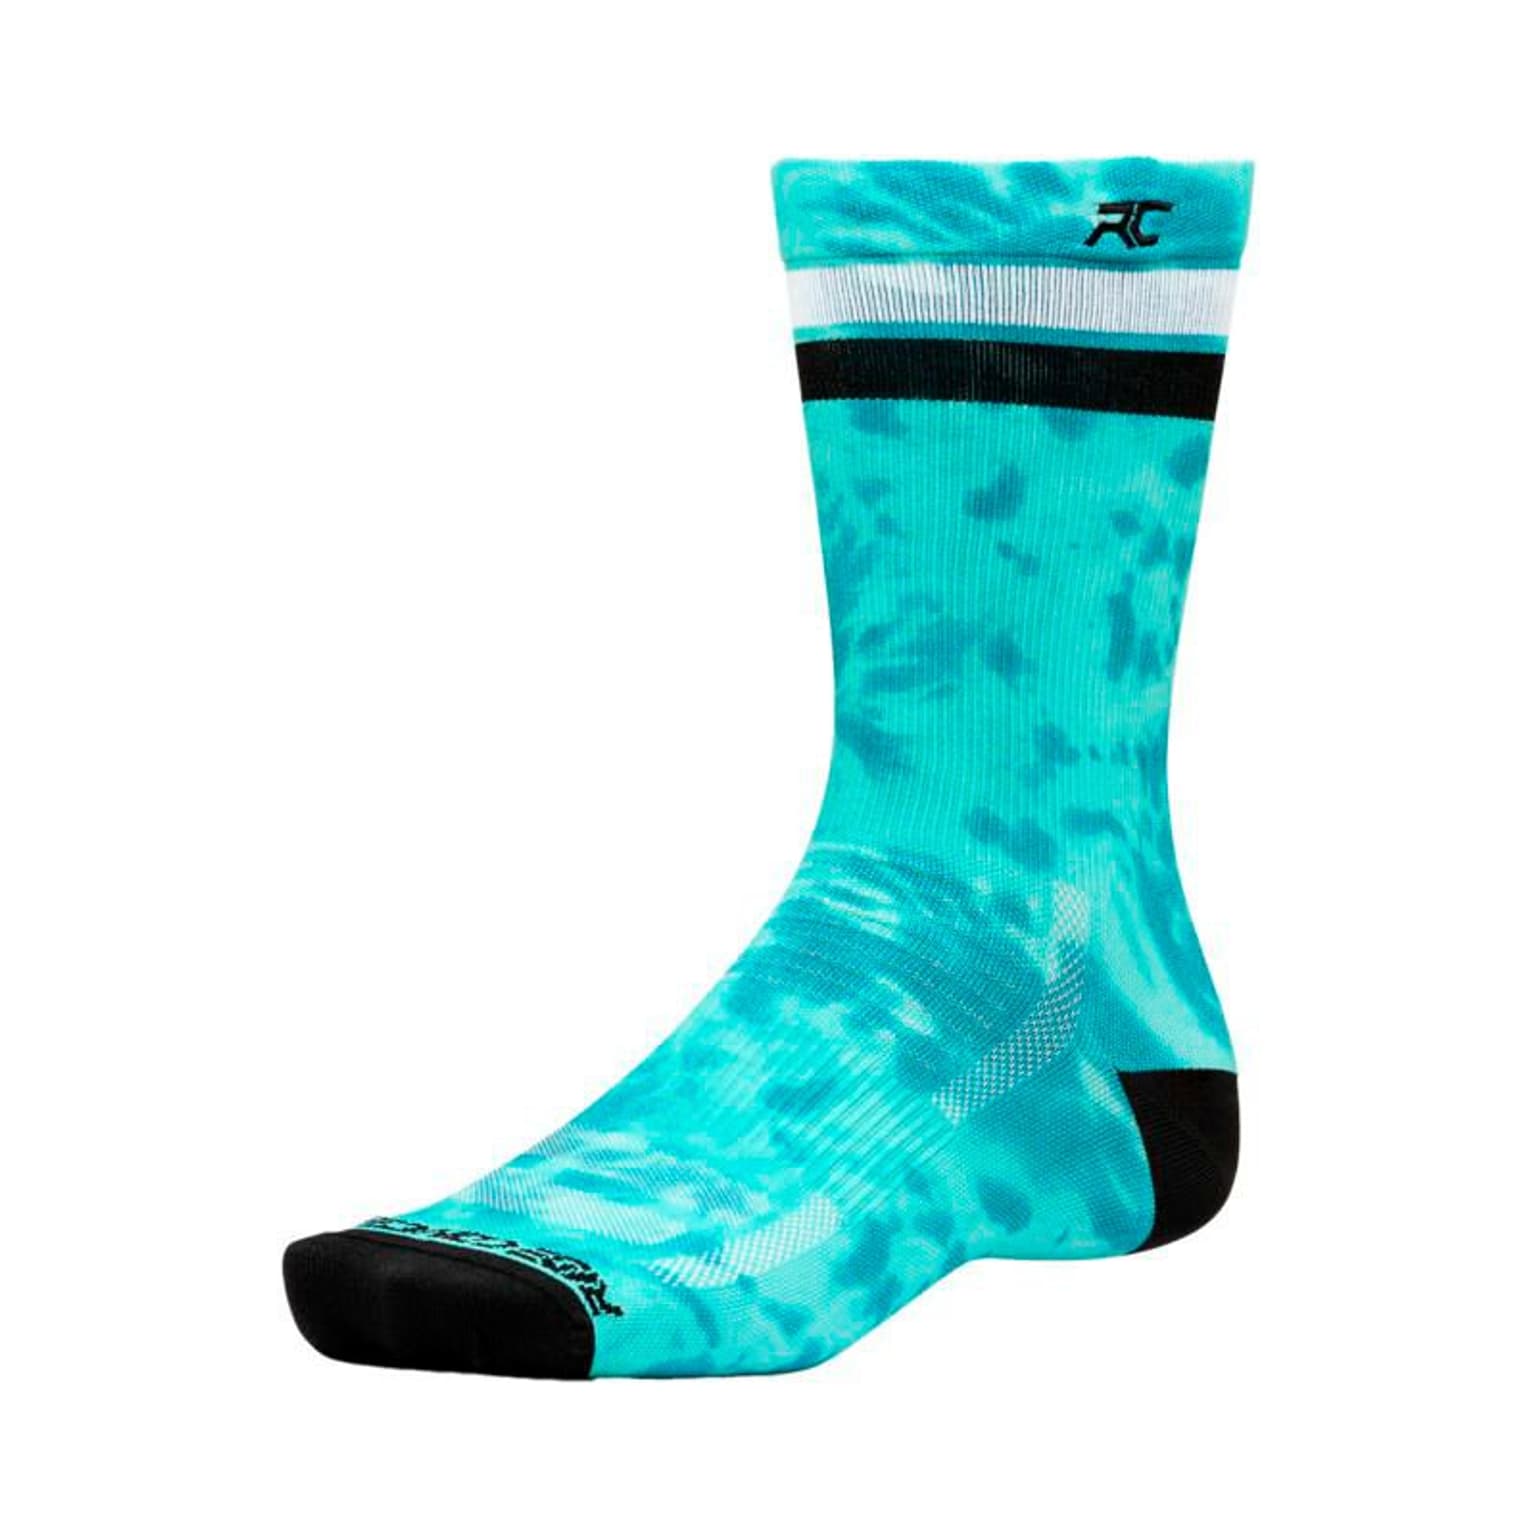 Ride Concepts Ride Concepts Alibi Synthetic Velosocken turquoise 1